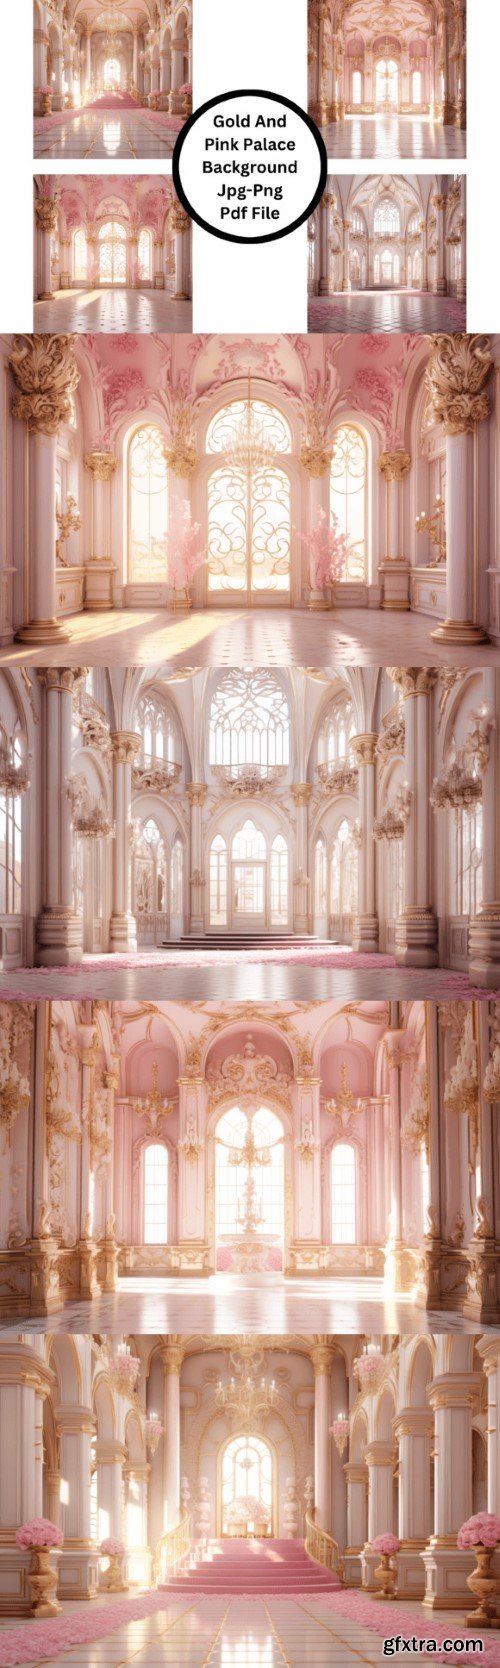 Gold and Pink Palace Background